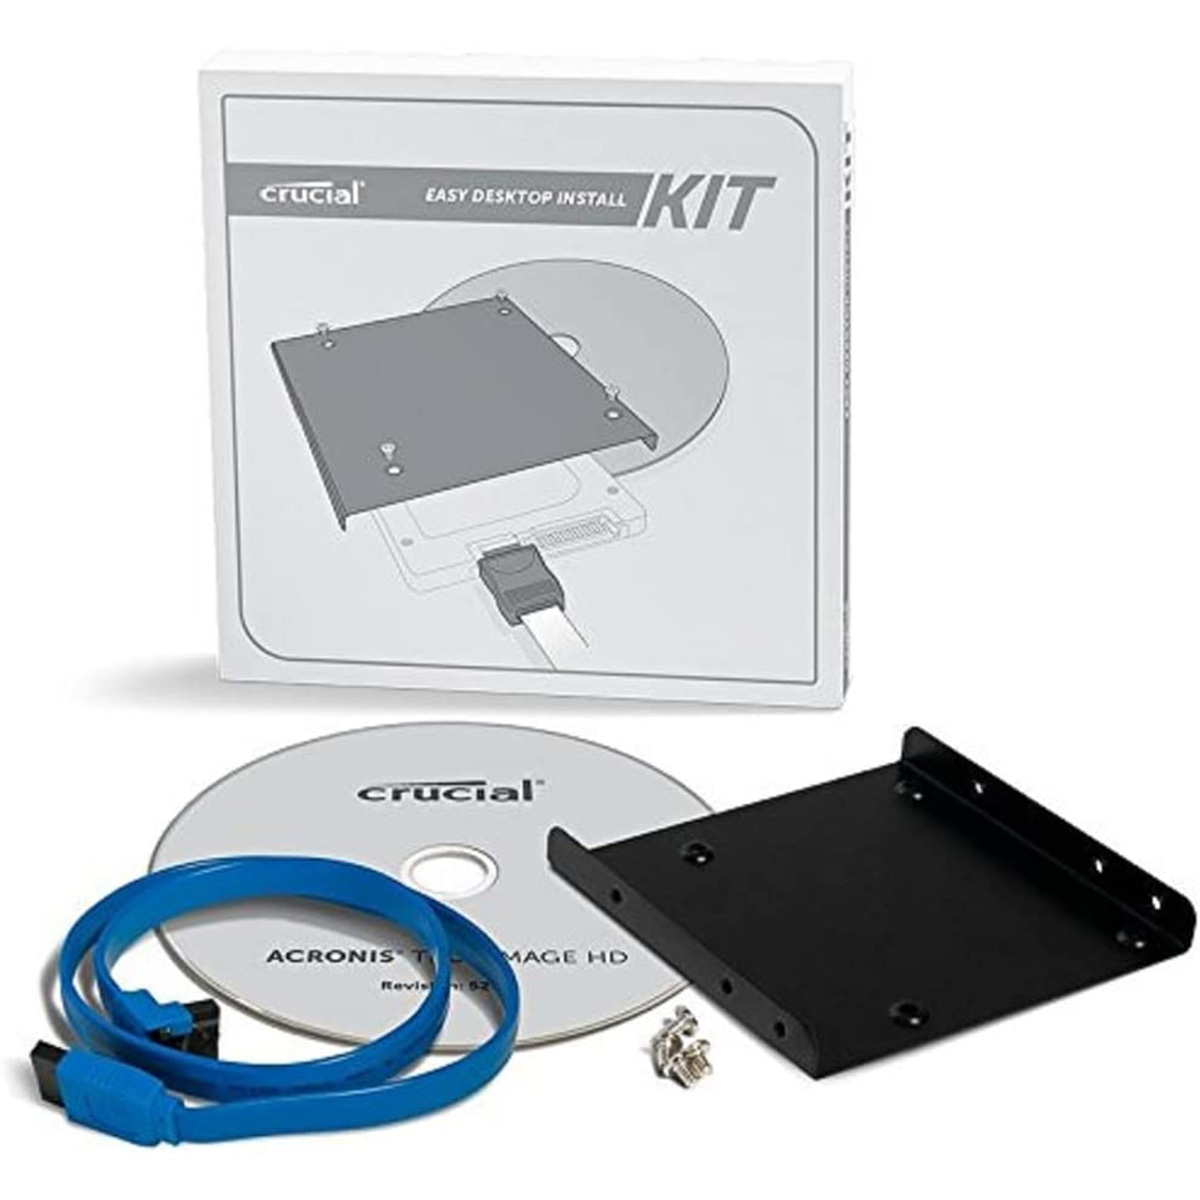 ■Solid State Drive Install Kit